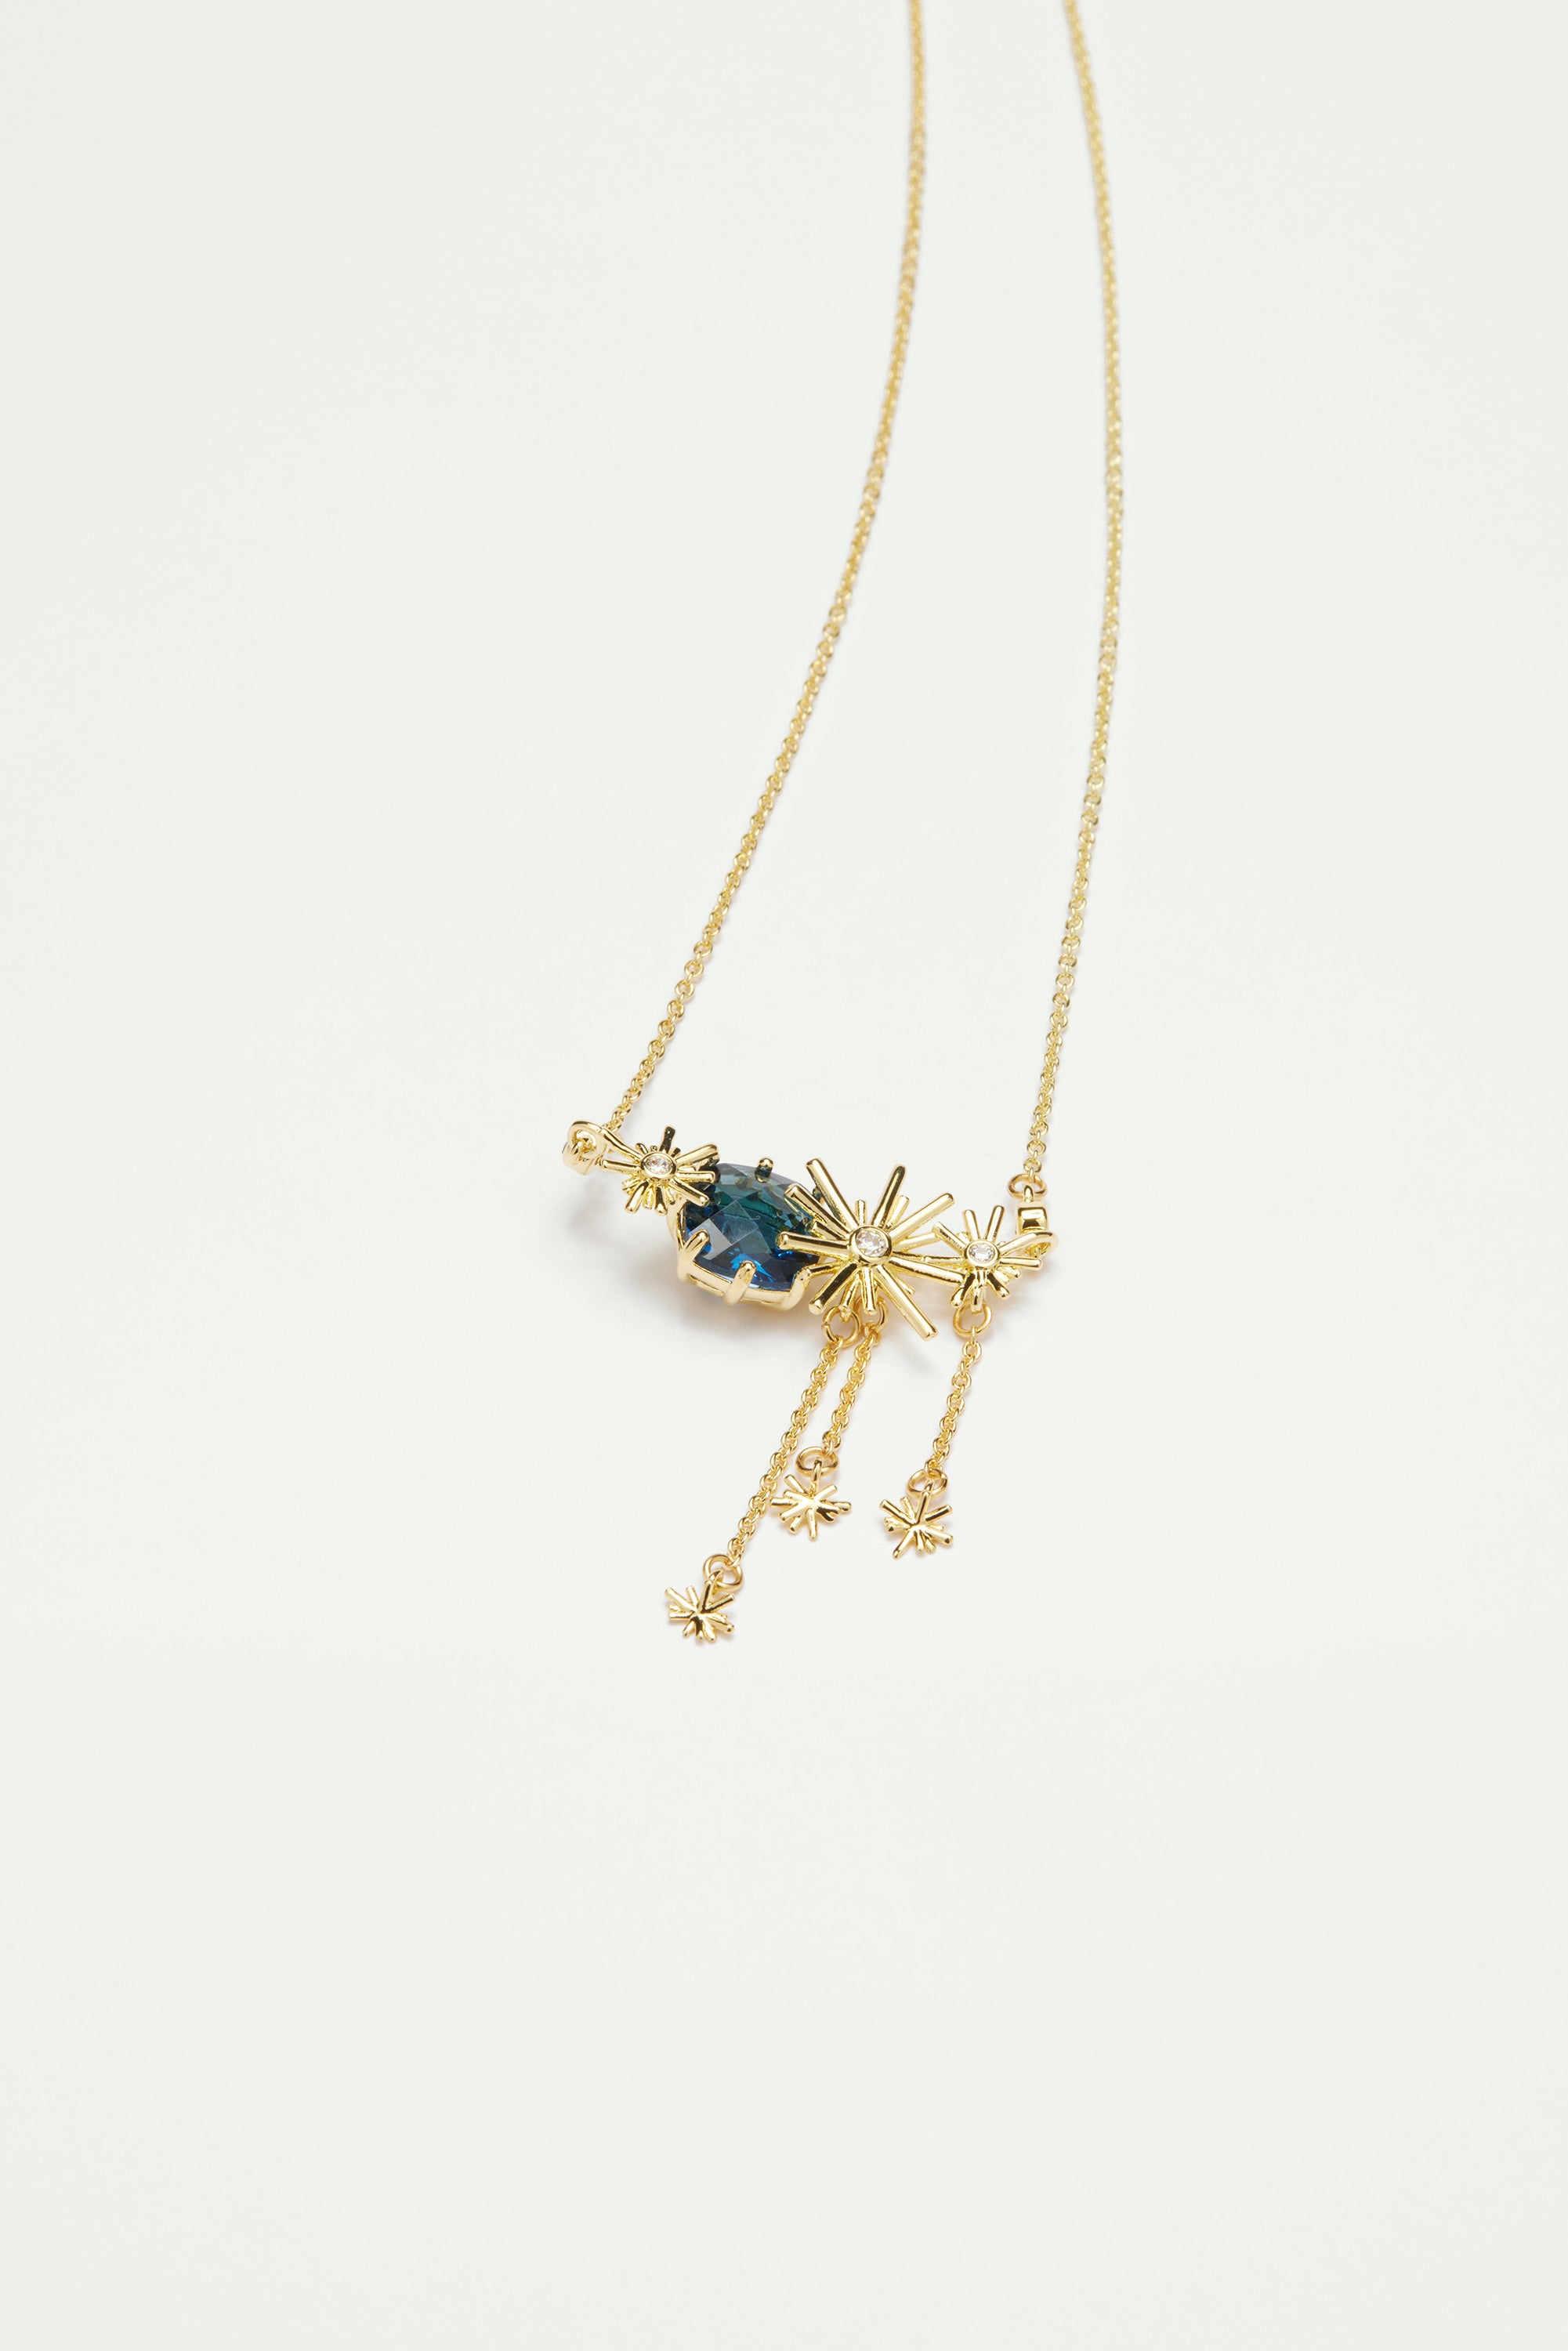 Gold stars and blue stone statement necklace